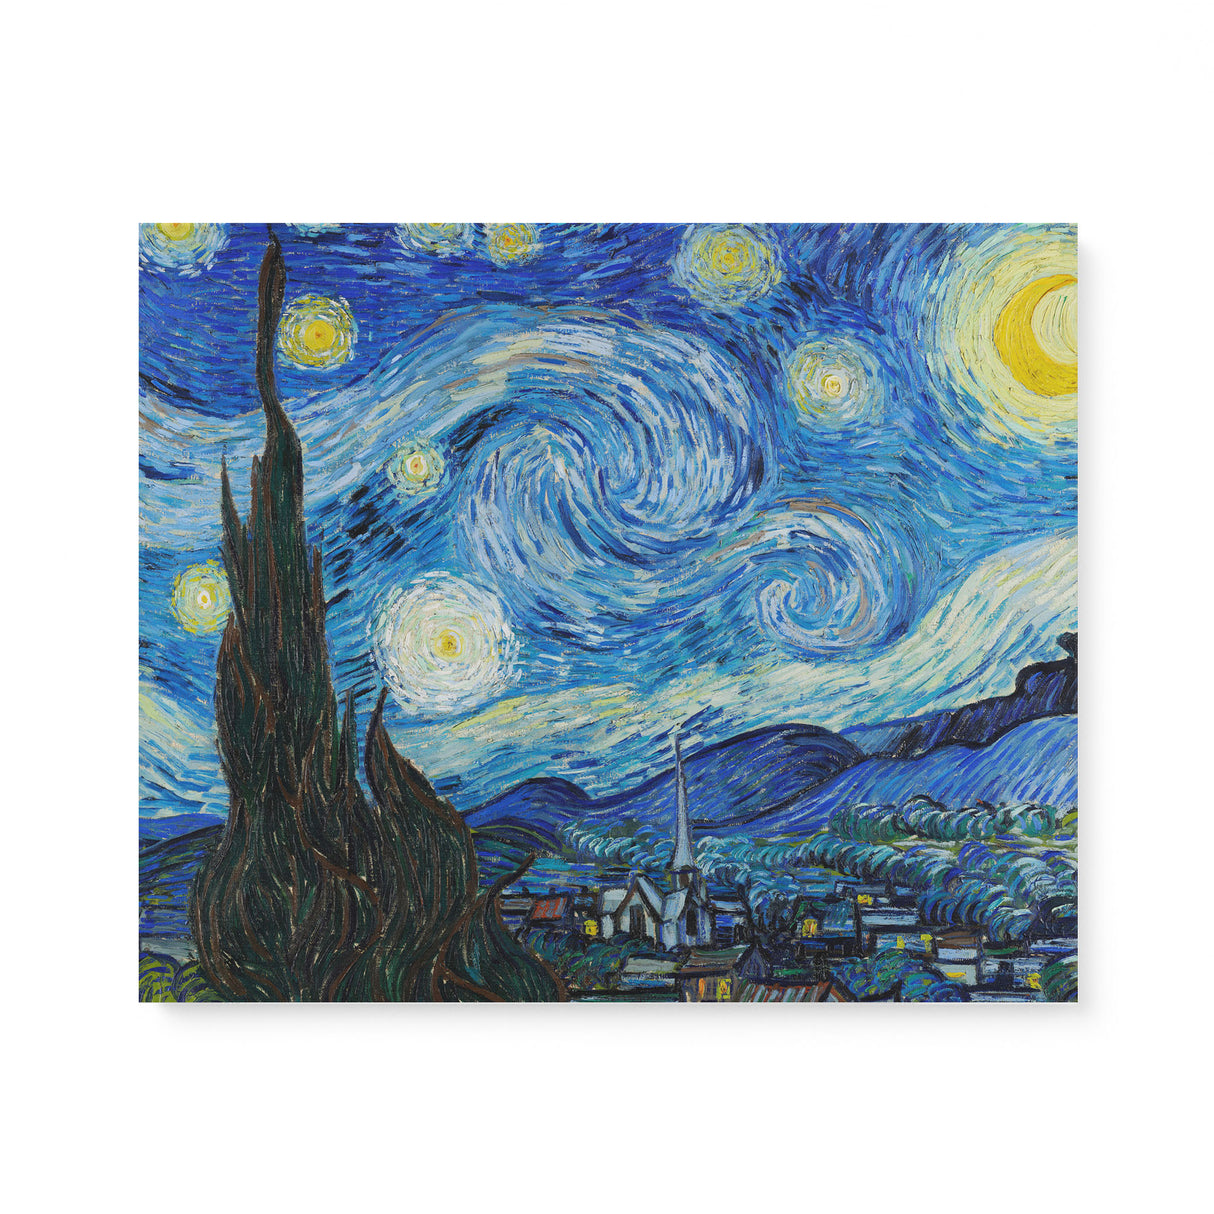 "The Starry Night" Wall Art Canvas Print by Vincent van Gogh Canvas Wall Art Sckribbles 24x20  